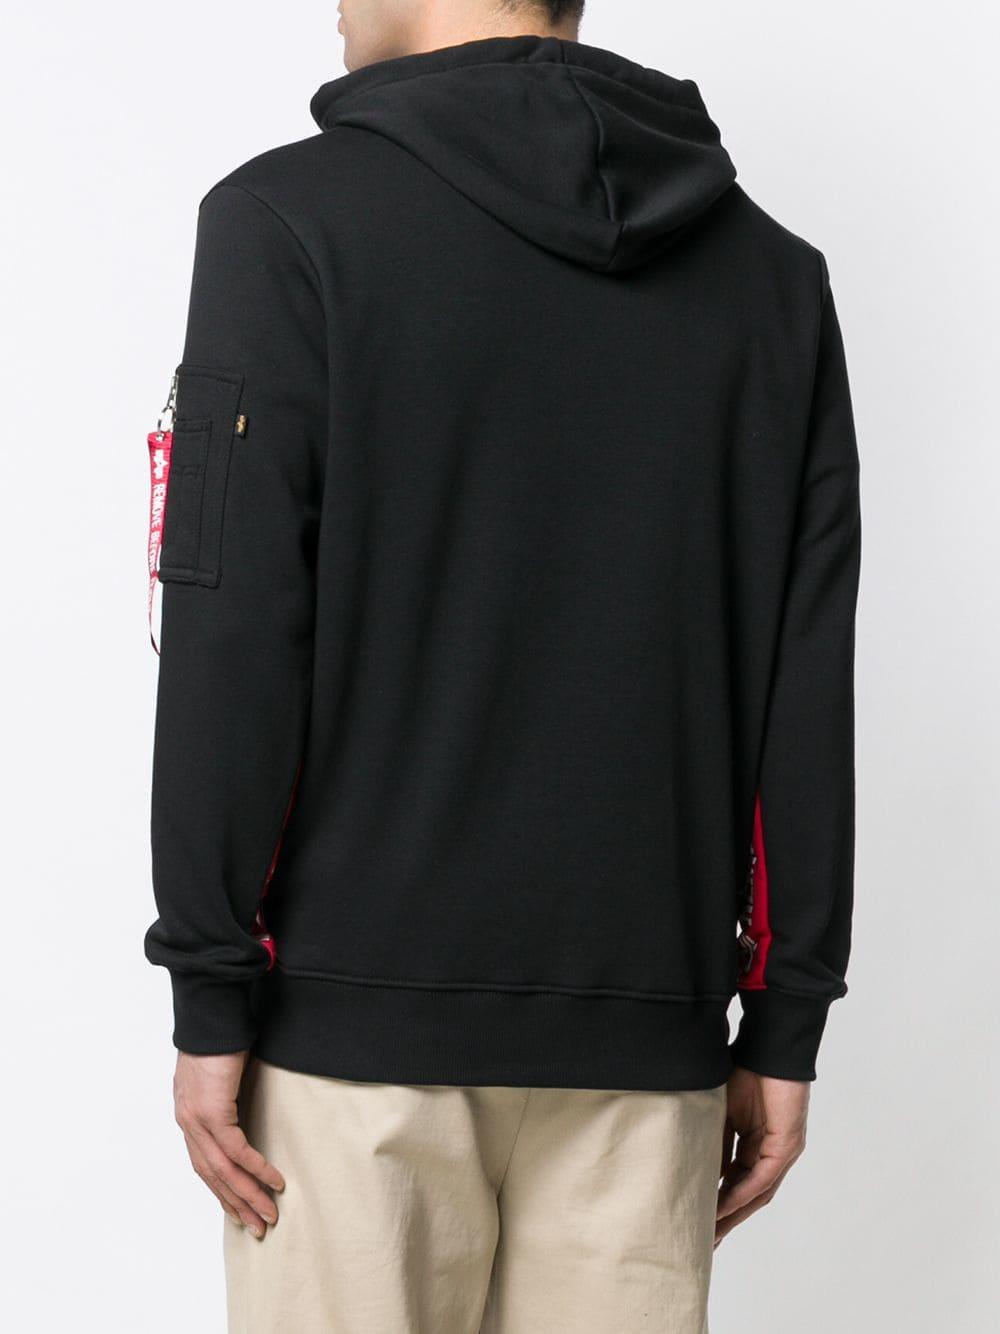 Alpha Industries Cotton Remove Before Flight Hoodie in Black for Men - Lyst